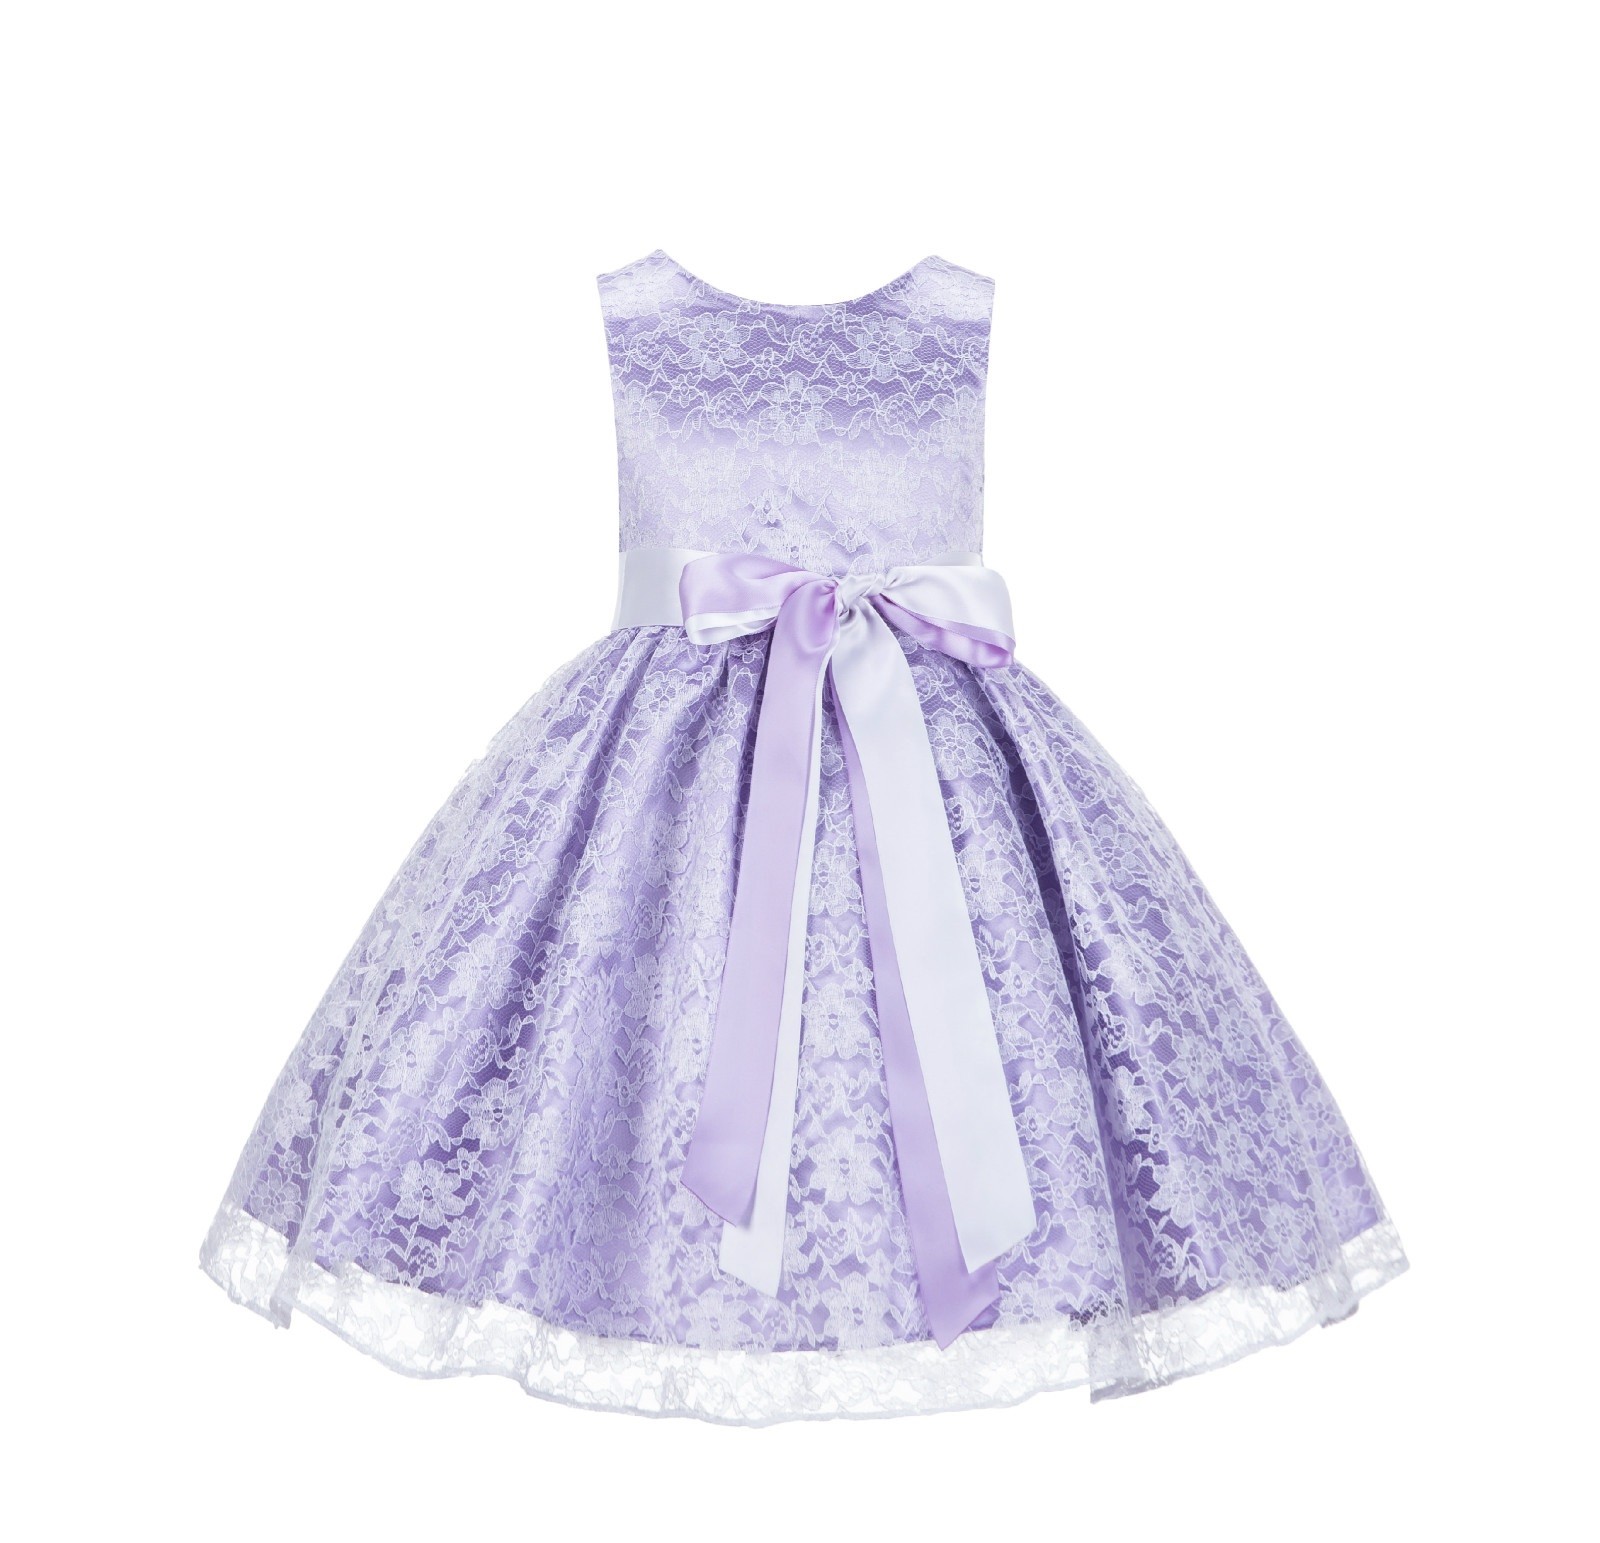 Lilac/White Floral Lace Overlay Ribbon Sash Flower Girl Dress 163R